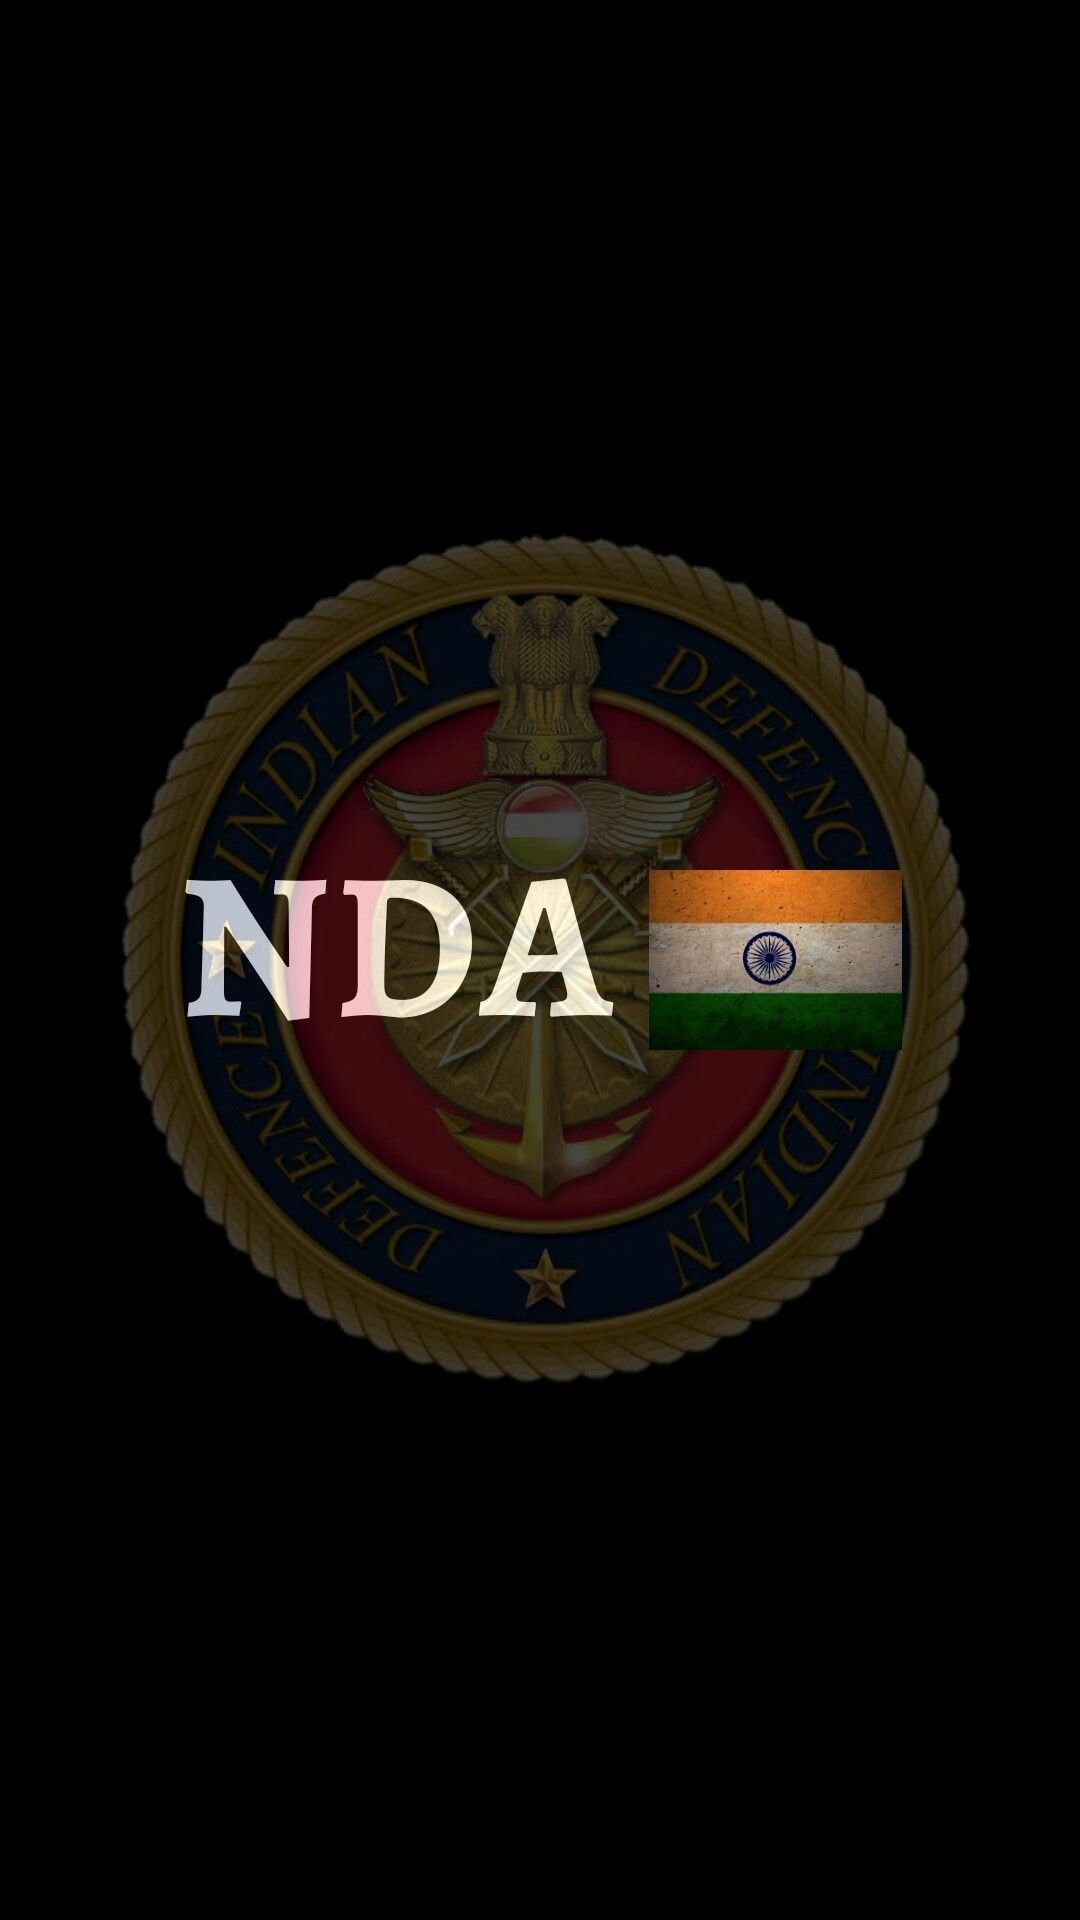 National defence academy Dpz Whatsapp DP Download